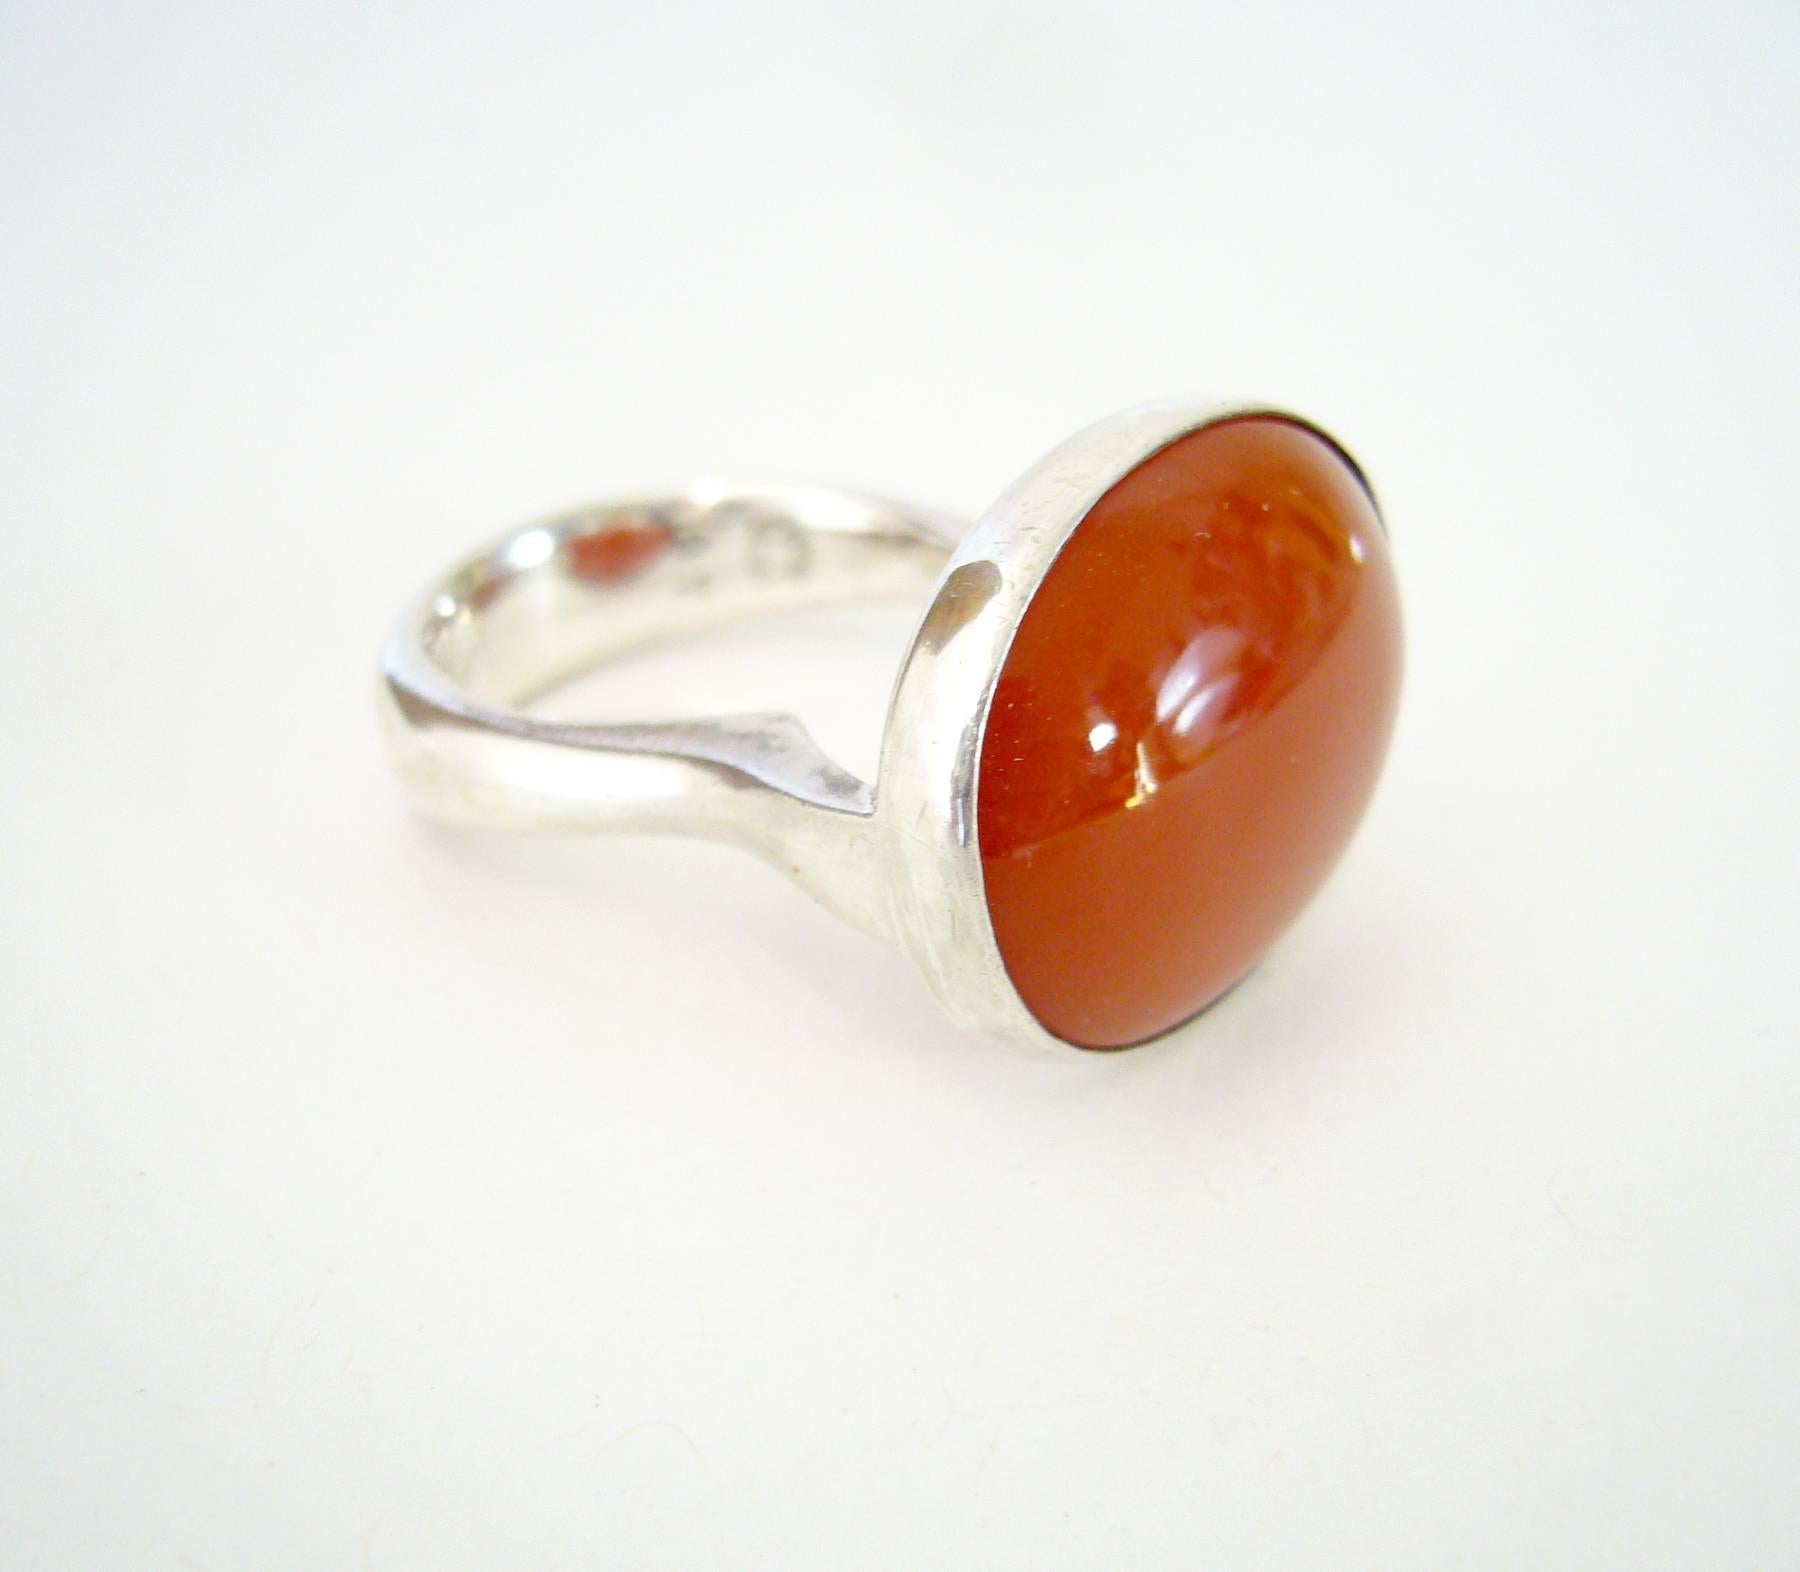 Rare, Danish modernist sterling silver and carnelian ring designed by Nanna and Jorgen Ditzel for Georg Jensen.  Ring is a finger size 8 - 8.5 and signed Georg Jensen, 925S, 97, Sterling, Denmark.  In very good vintage condition.  